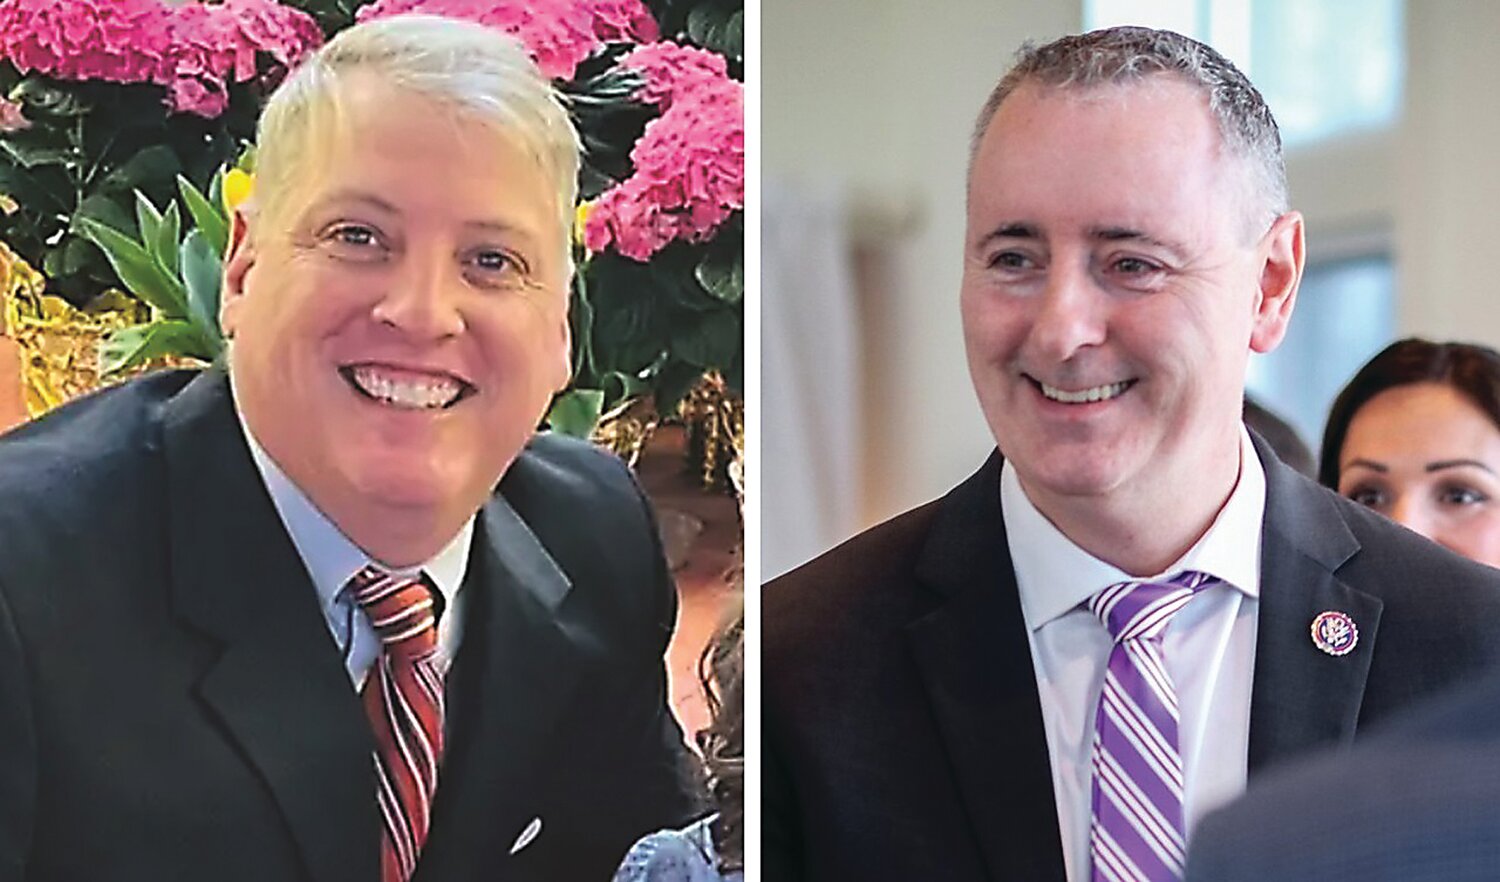 Unofficial tallies Tuesday night indicated that Mark Houck, left, fell short in his bid to replace incumbent U.S. Rep. Brian Fitzpatrick on the Republican ticket heading into the General Election in November.